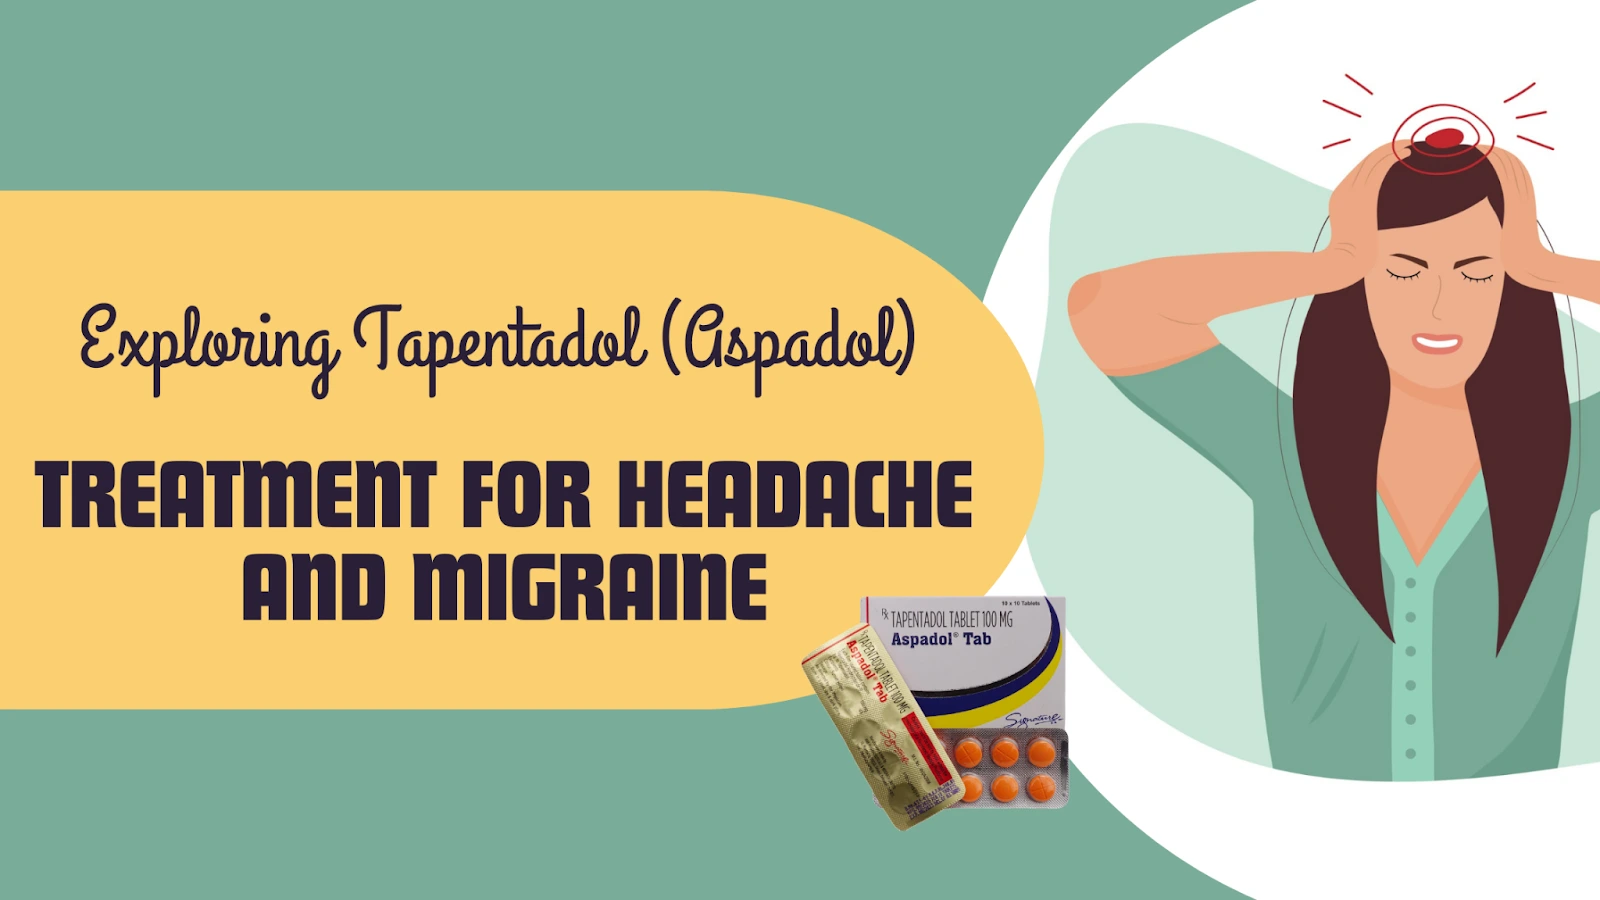 Exploring Tapentadol (Aspadol) As A Treatment For Headache And Migraine